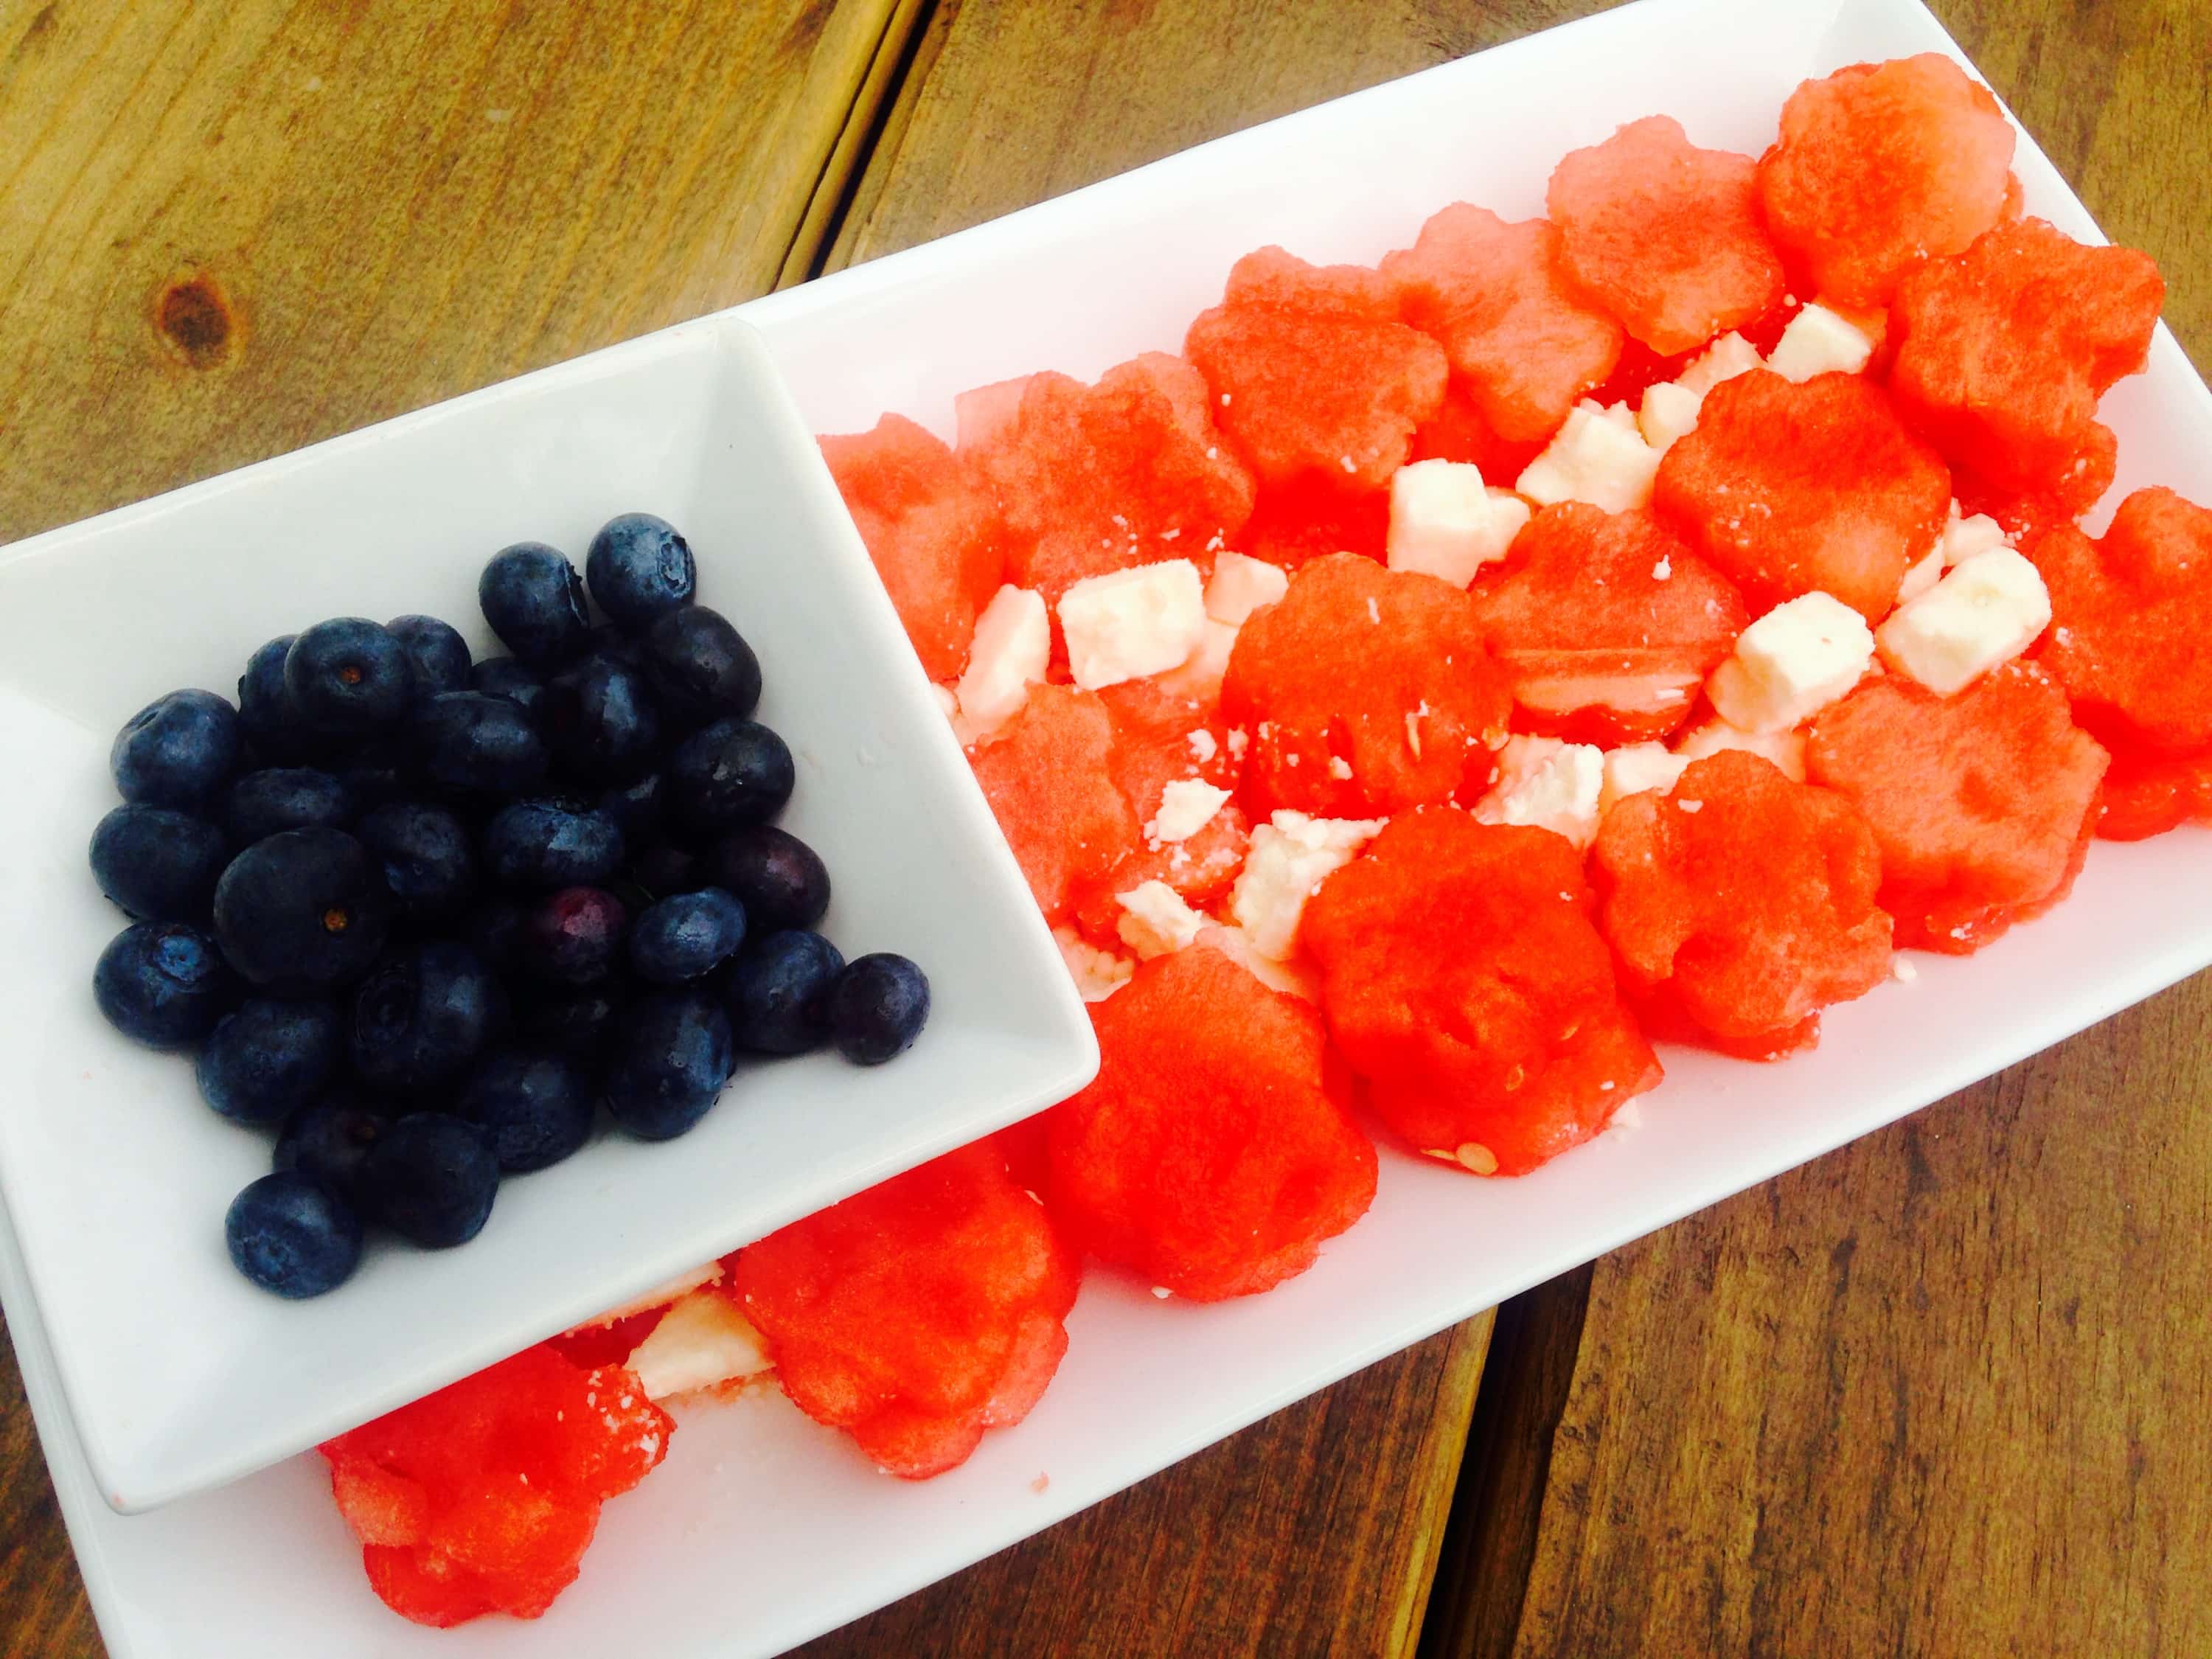 Watermelon, feta, and blueberries arranged in the shape of an American flag on a long rectangular serving plate with a wooden backgrouund